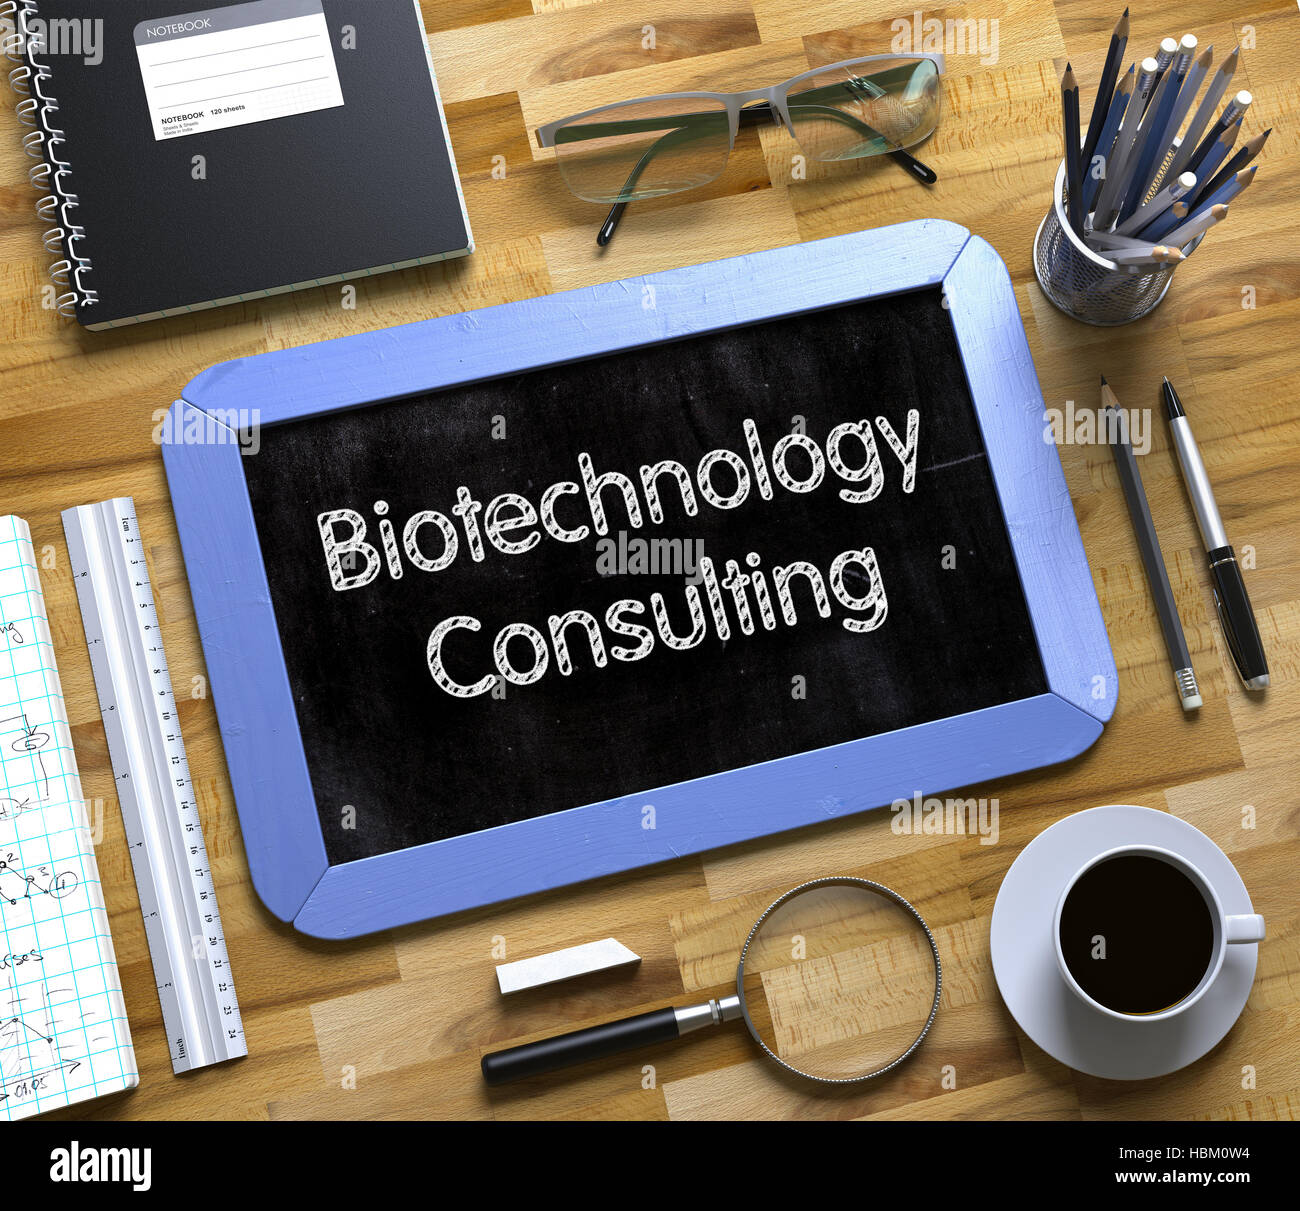 Biotechnology Consulting Text on Small Chalkboard. 3D Stock Photo Alamy